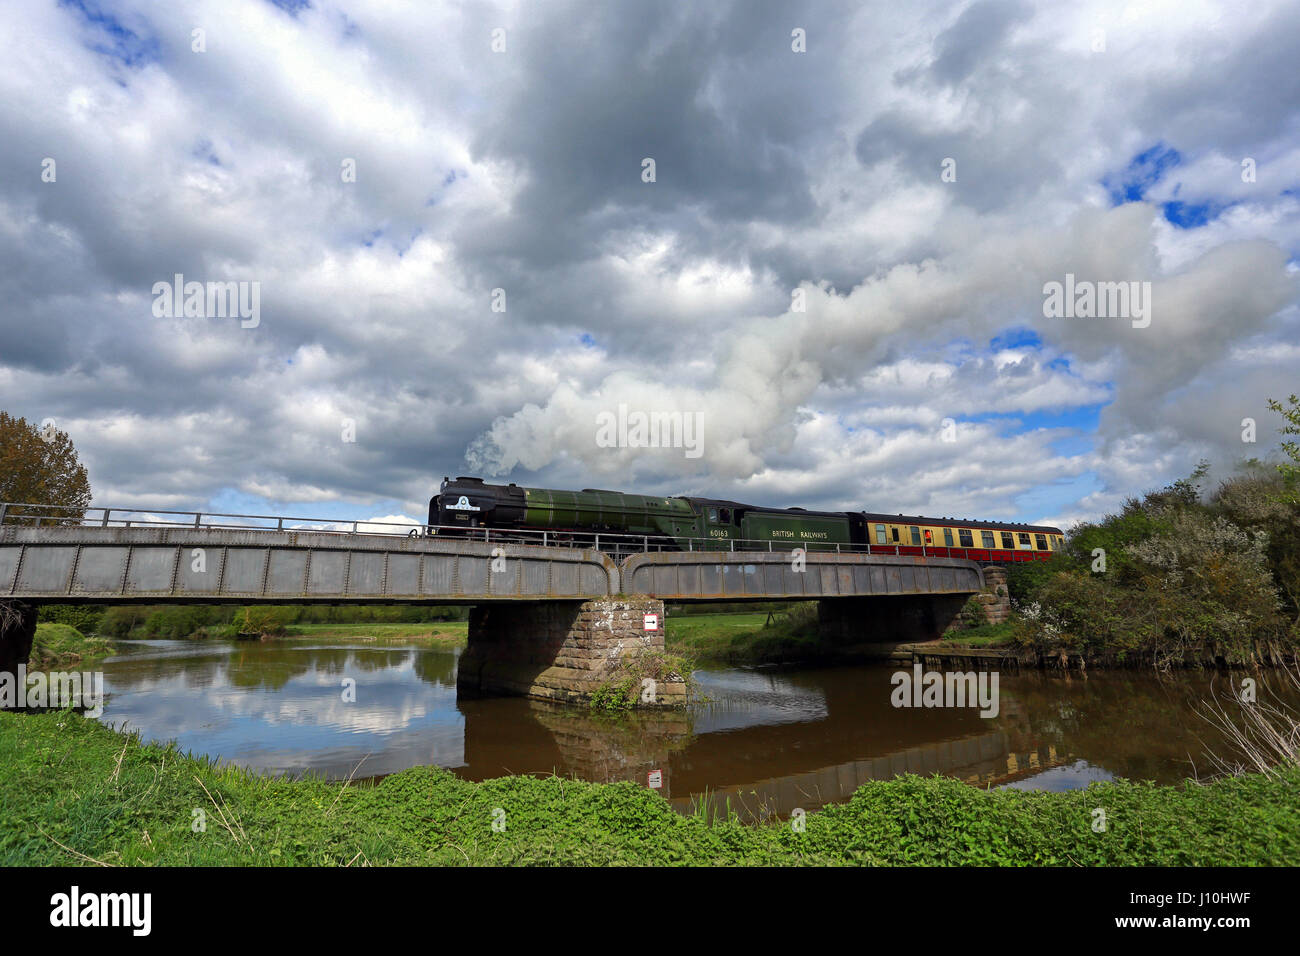 Tornado Steam train . Peterborough, UK. 17th Apr, 2017. The Tornado steam locomotive 60163 makes its way over the River Nene on the way to Nene Valley Railway in Wansford, Cambridgeshire. The Tornado is making a special appearance this coming weekend, after recently travelling at 100mph on the East Coast mainline. Credit: Paul Marriott/Alamy Live News Stock Photo